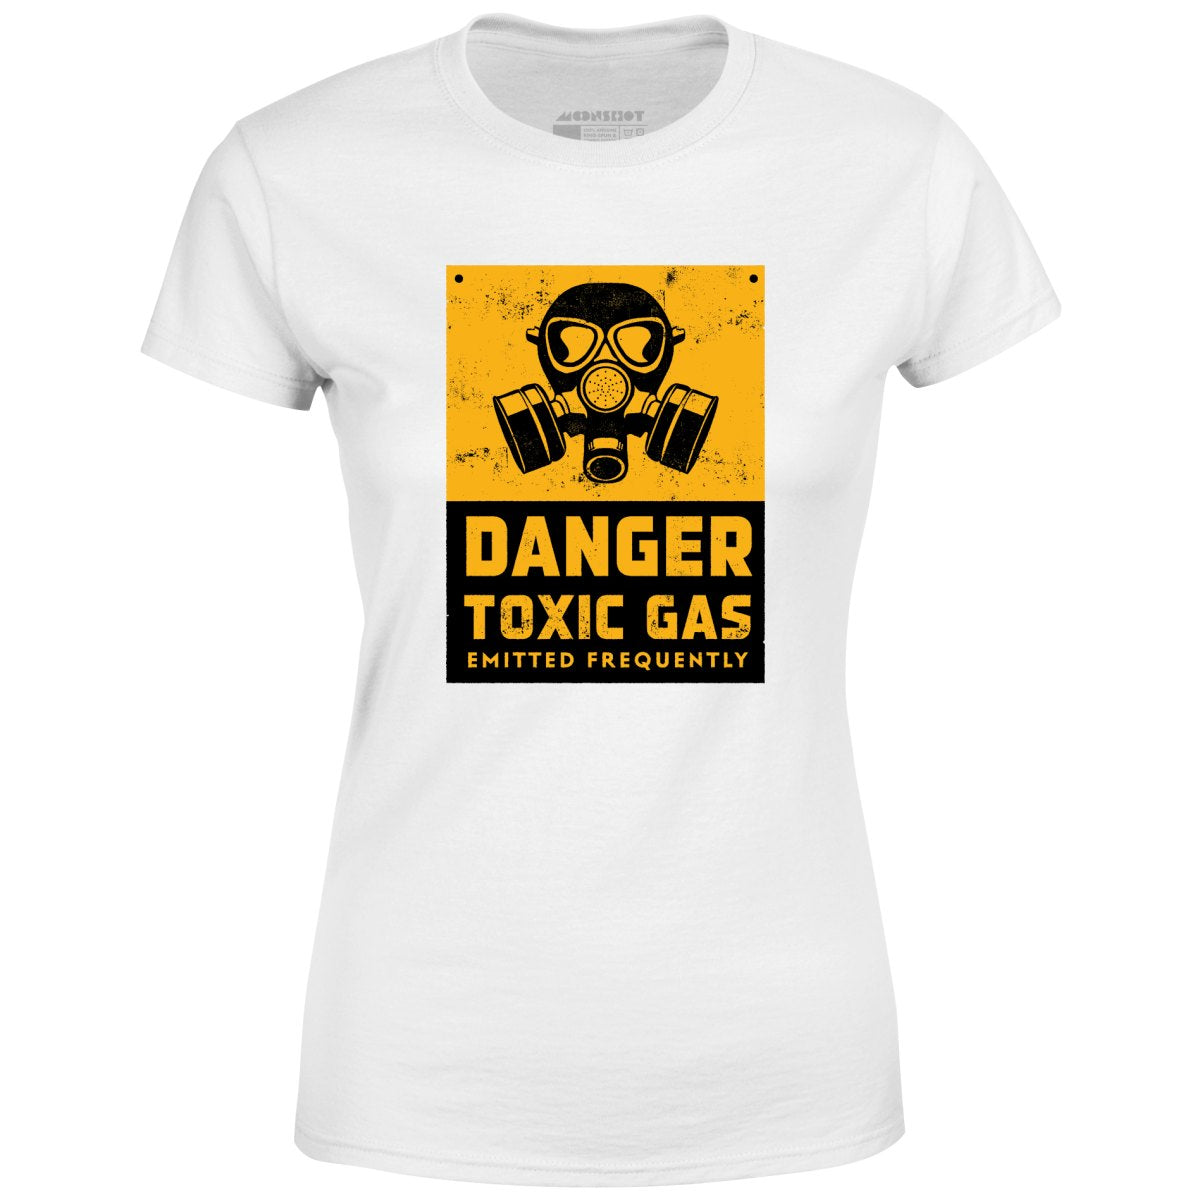 Danger Toxic Gas Emitted Frequently - Women's T-Shirt